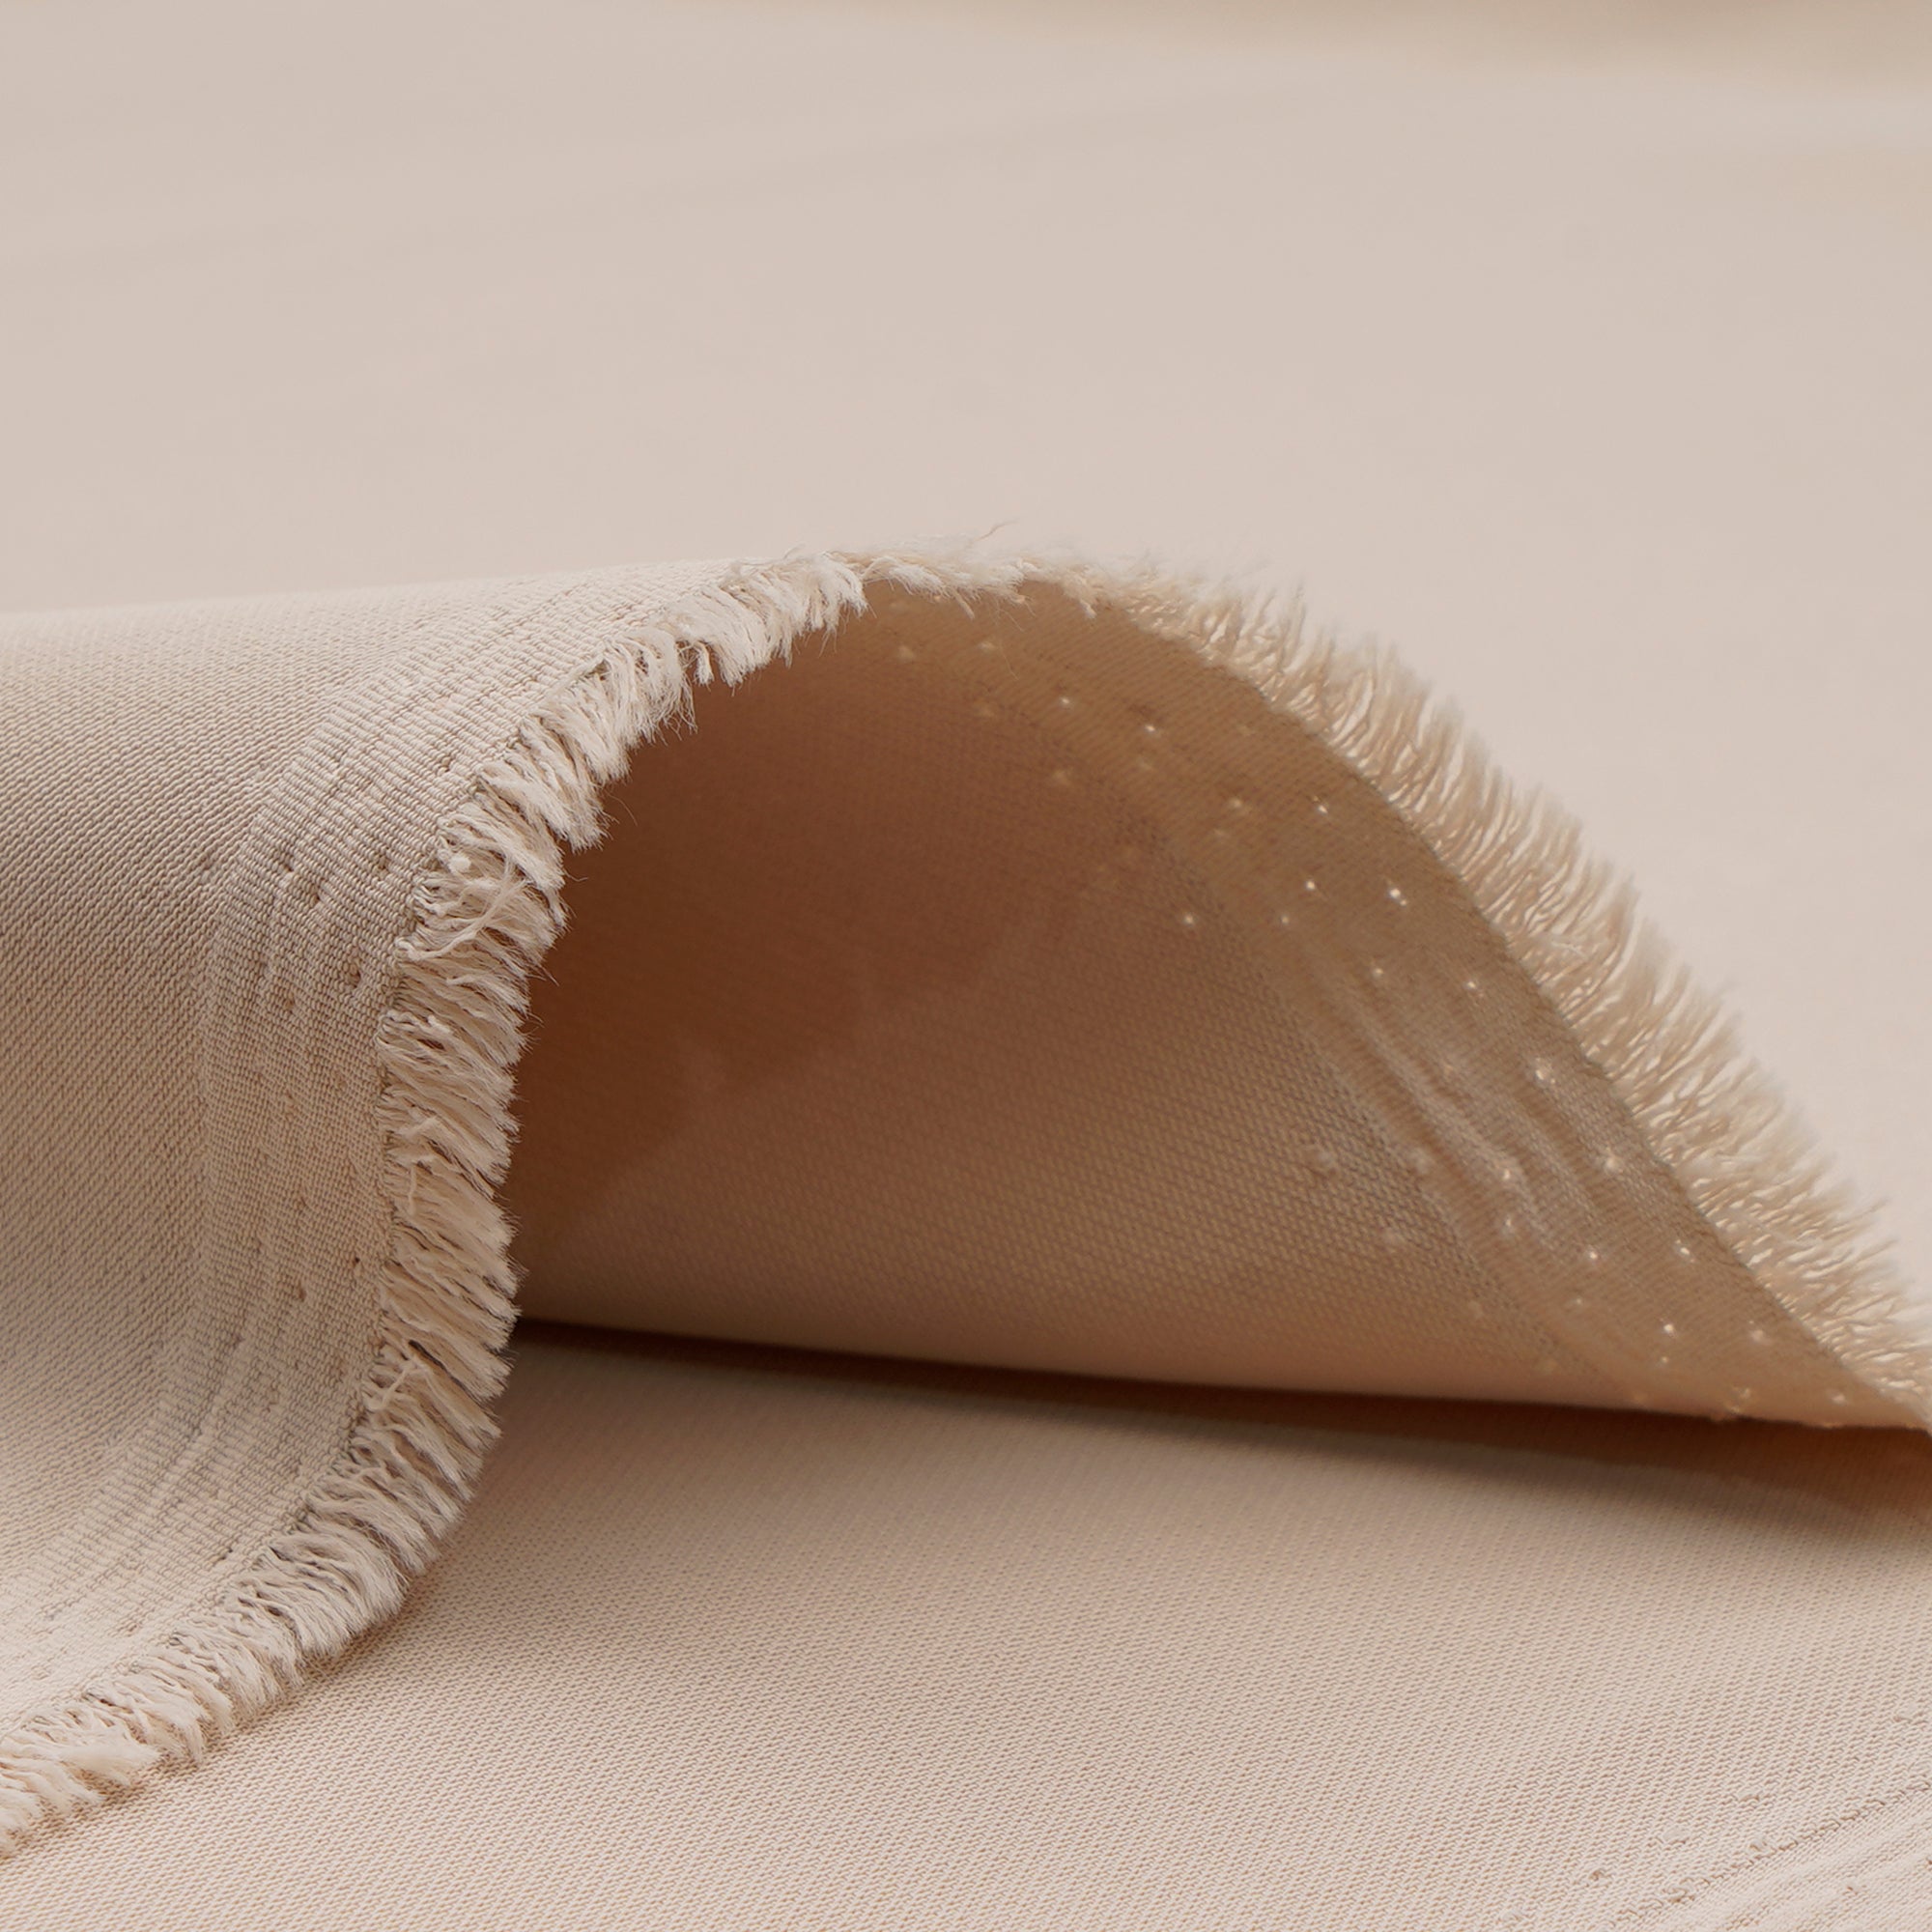 Cream Solid Dyed Imported Mesh Twill Satin Fabric (60" Width)